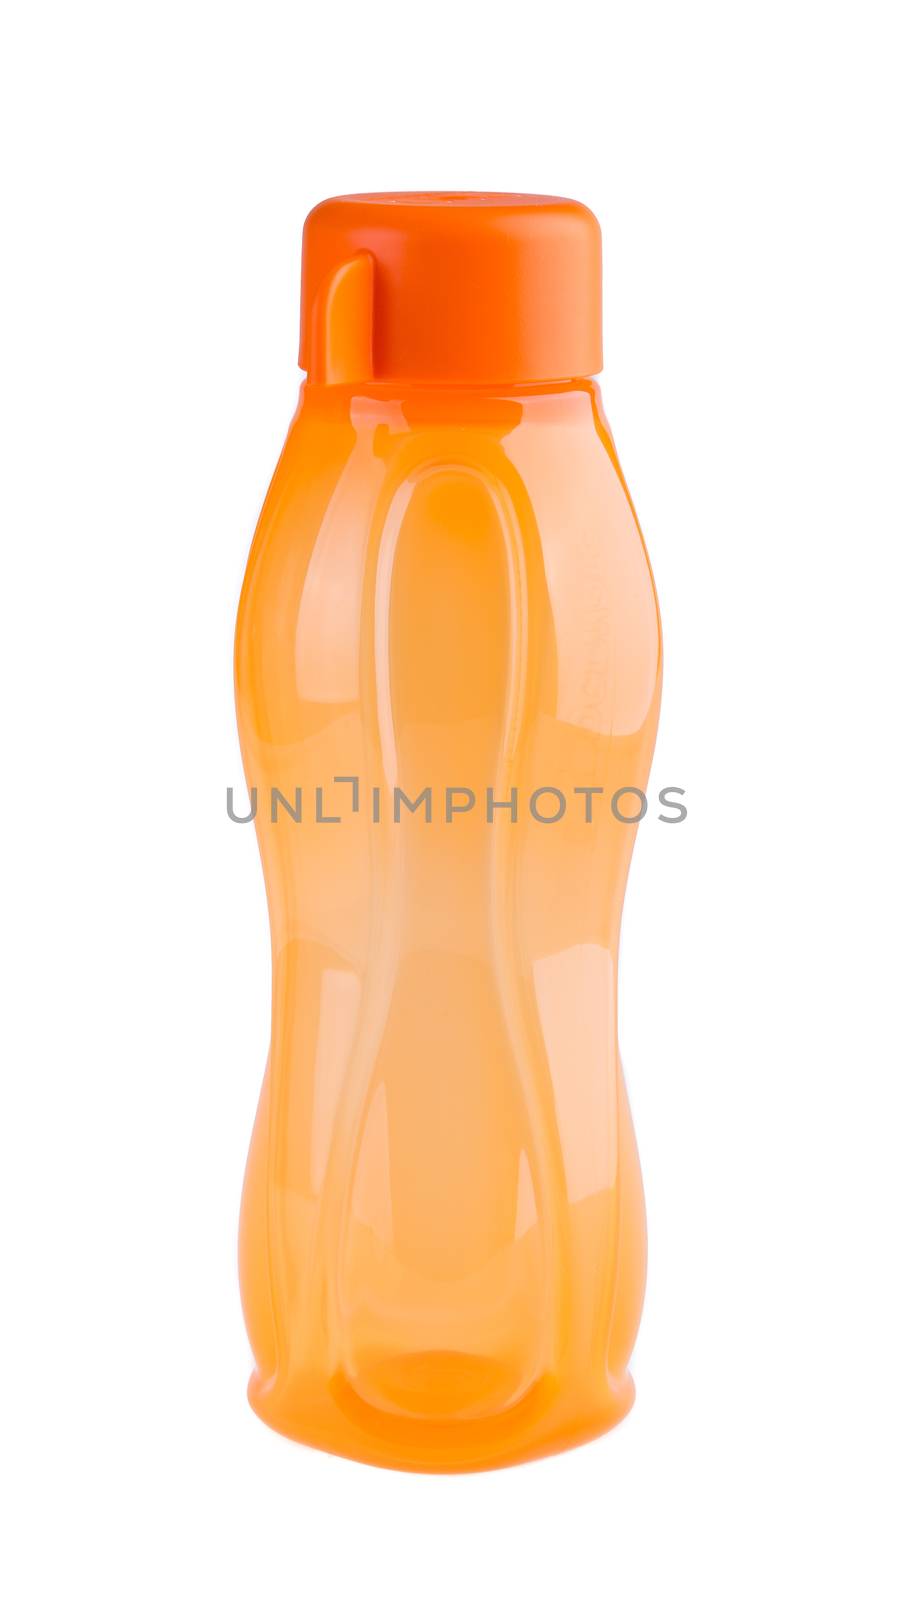 Colored plastic bottles isolated on white background